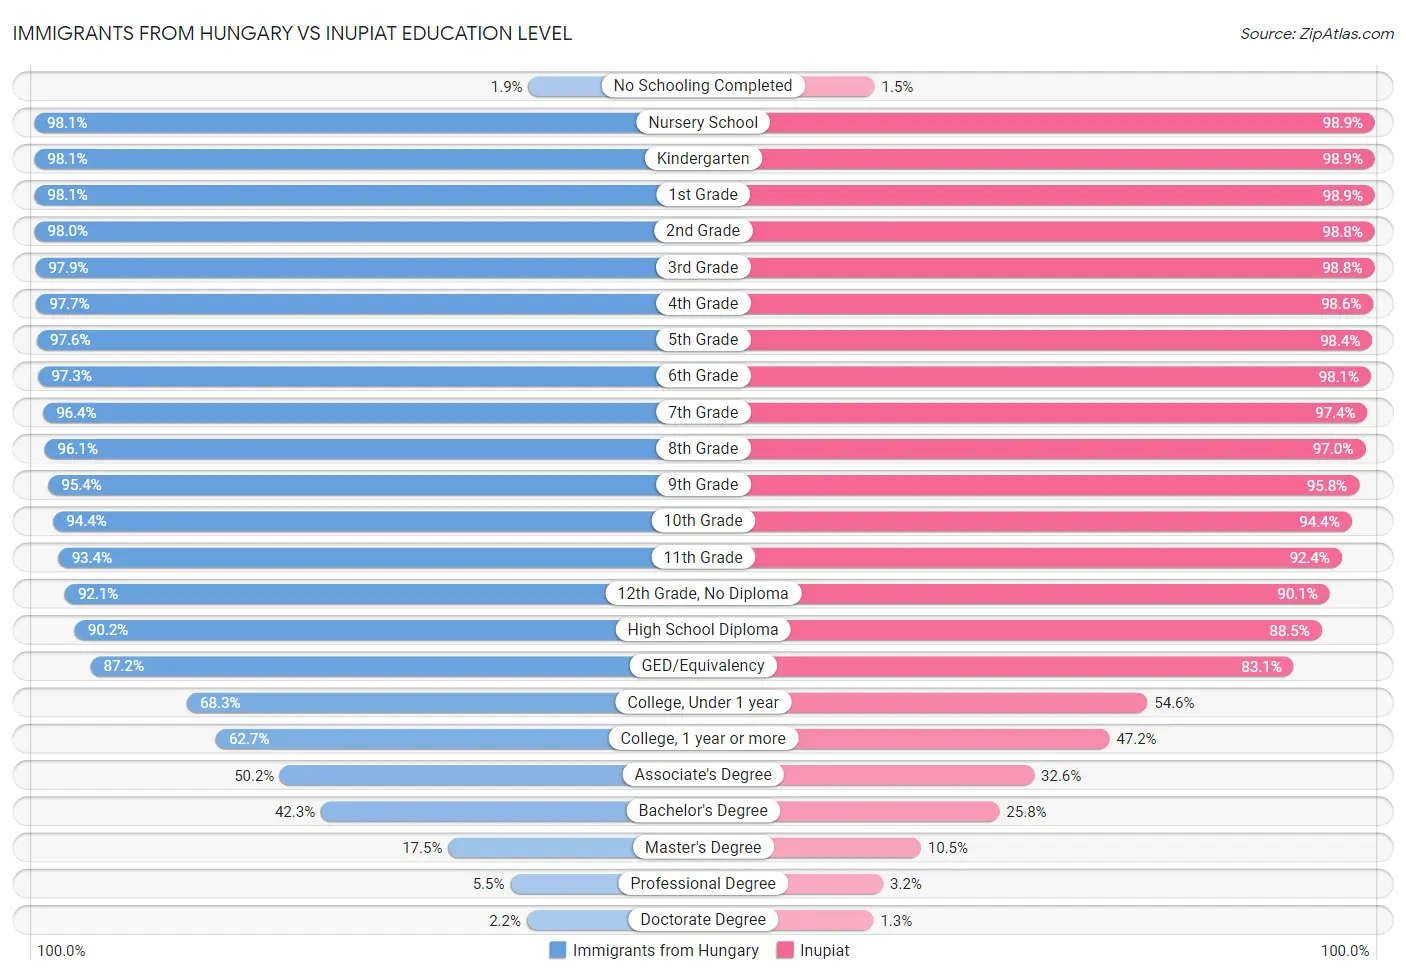 Immigrants from Hungary vs Inupiat Education Level